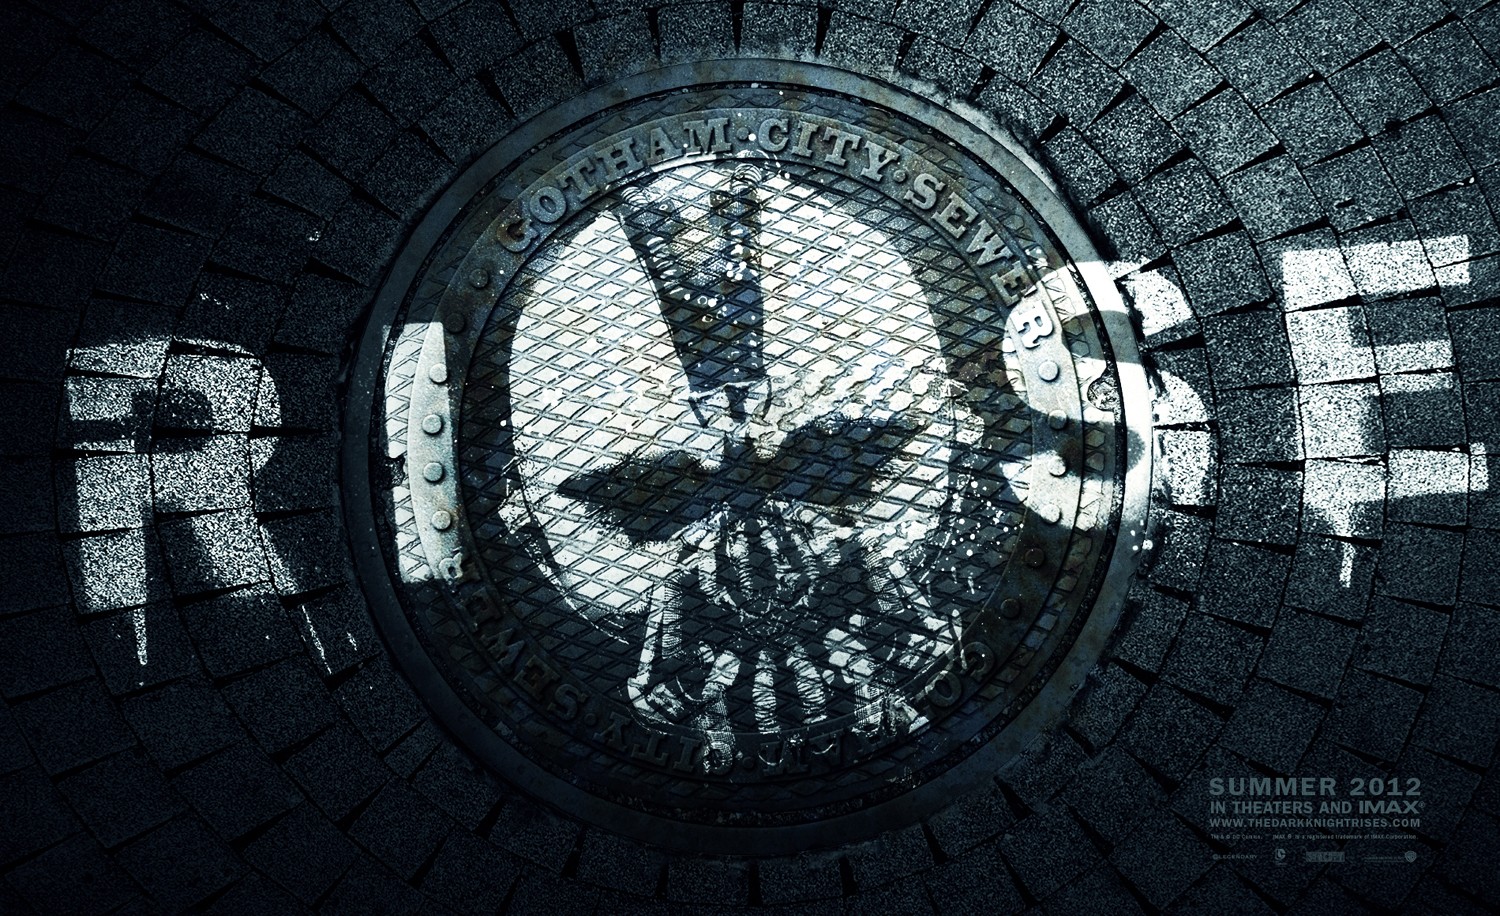 Knight Rises Promotional Poster Bane Hq The Dark